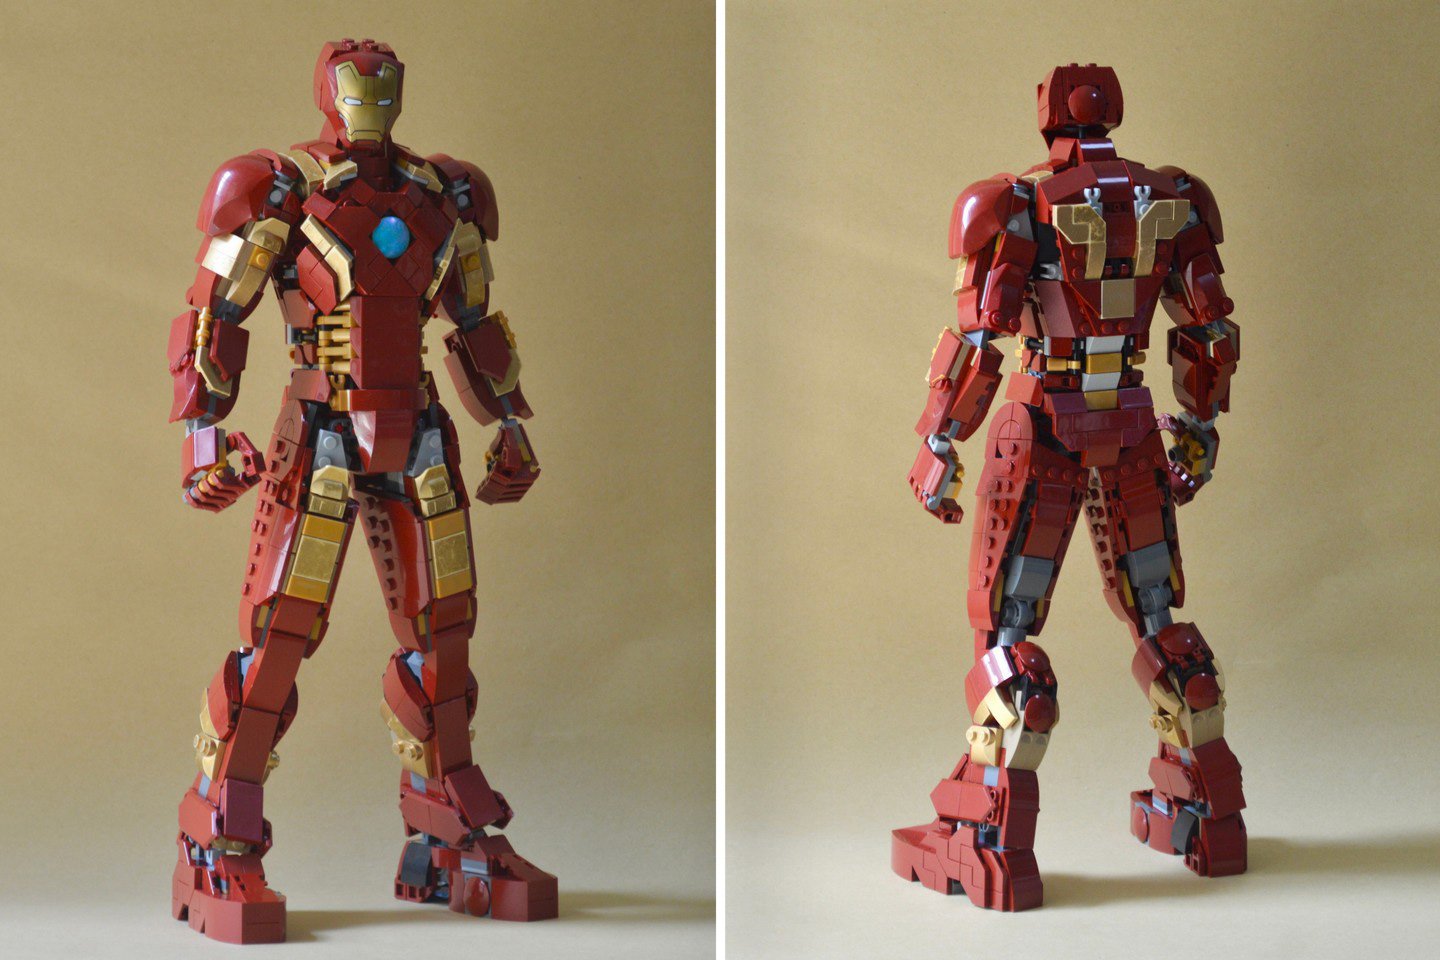 #Custom LEGO Iron Man figurine comes with movable arms and legs, and even a glowing arc reactor!